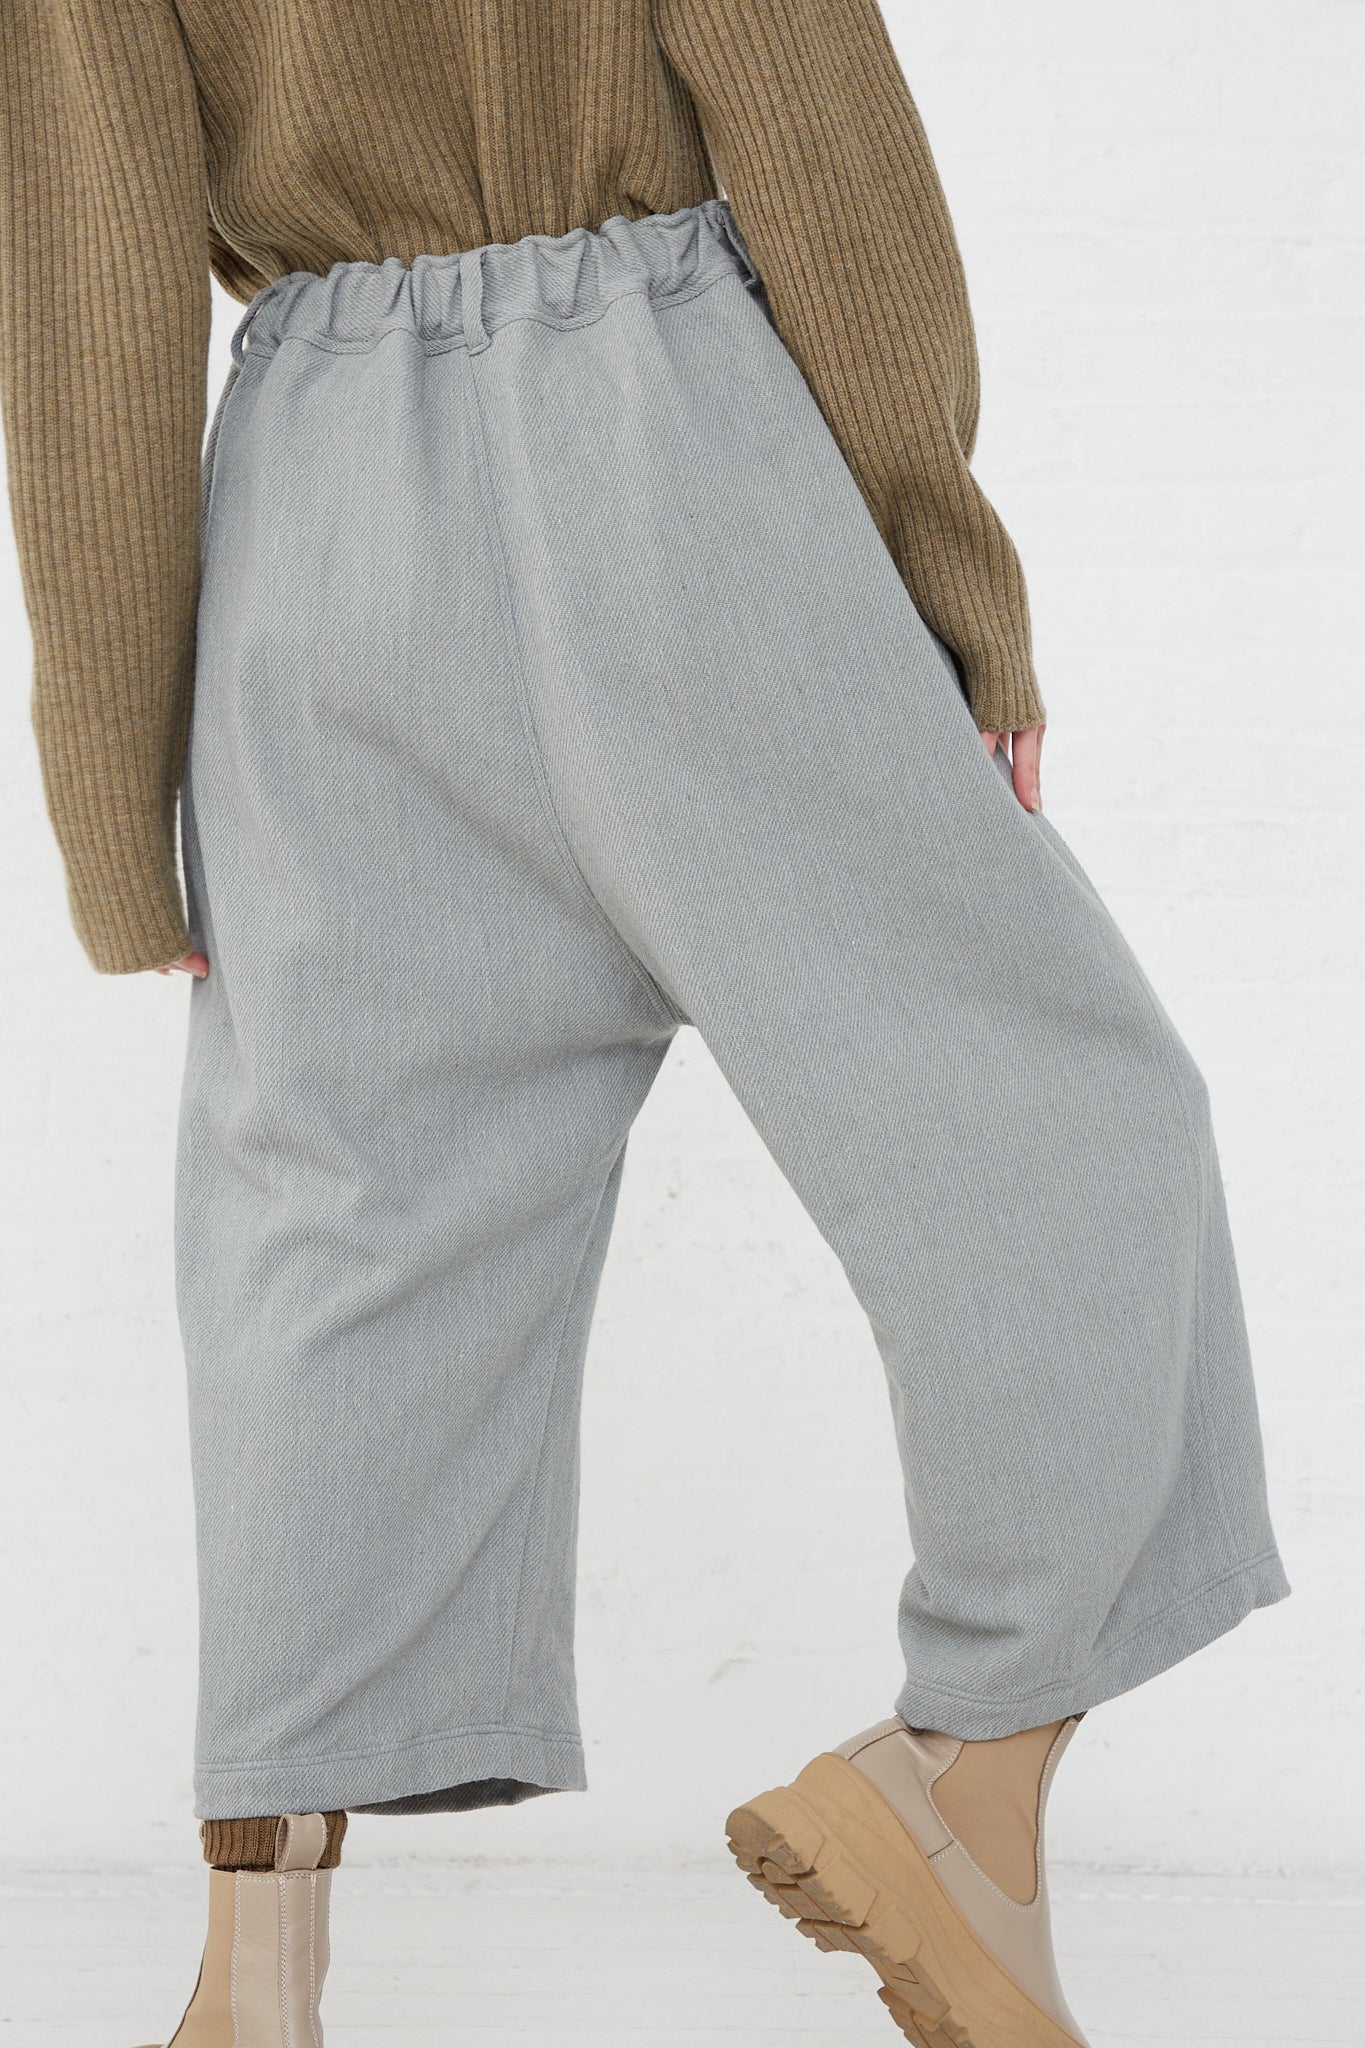 The back view of a woman wearing an Ichi Antiquités Merino Wool Orihimedaki Pant in Blue with an elasticated waist, rendered in a chic grey color.